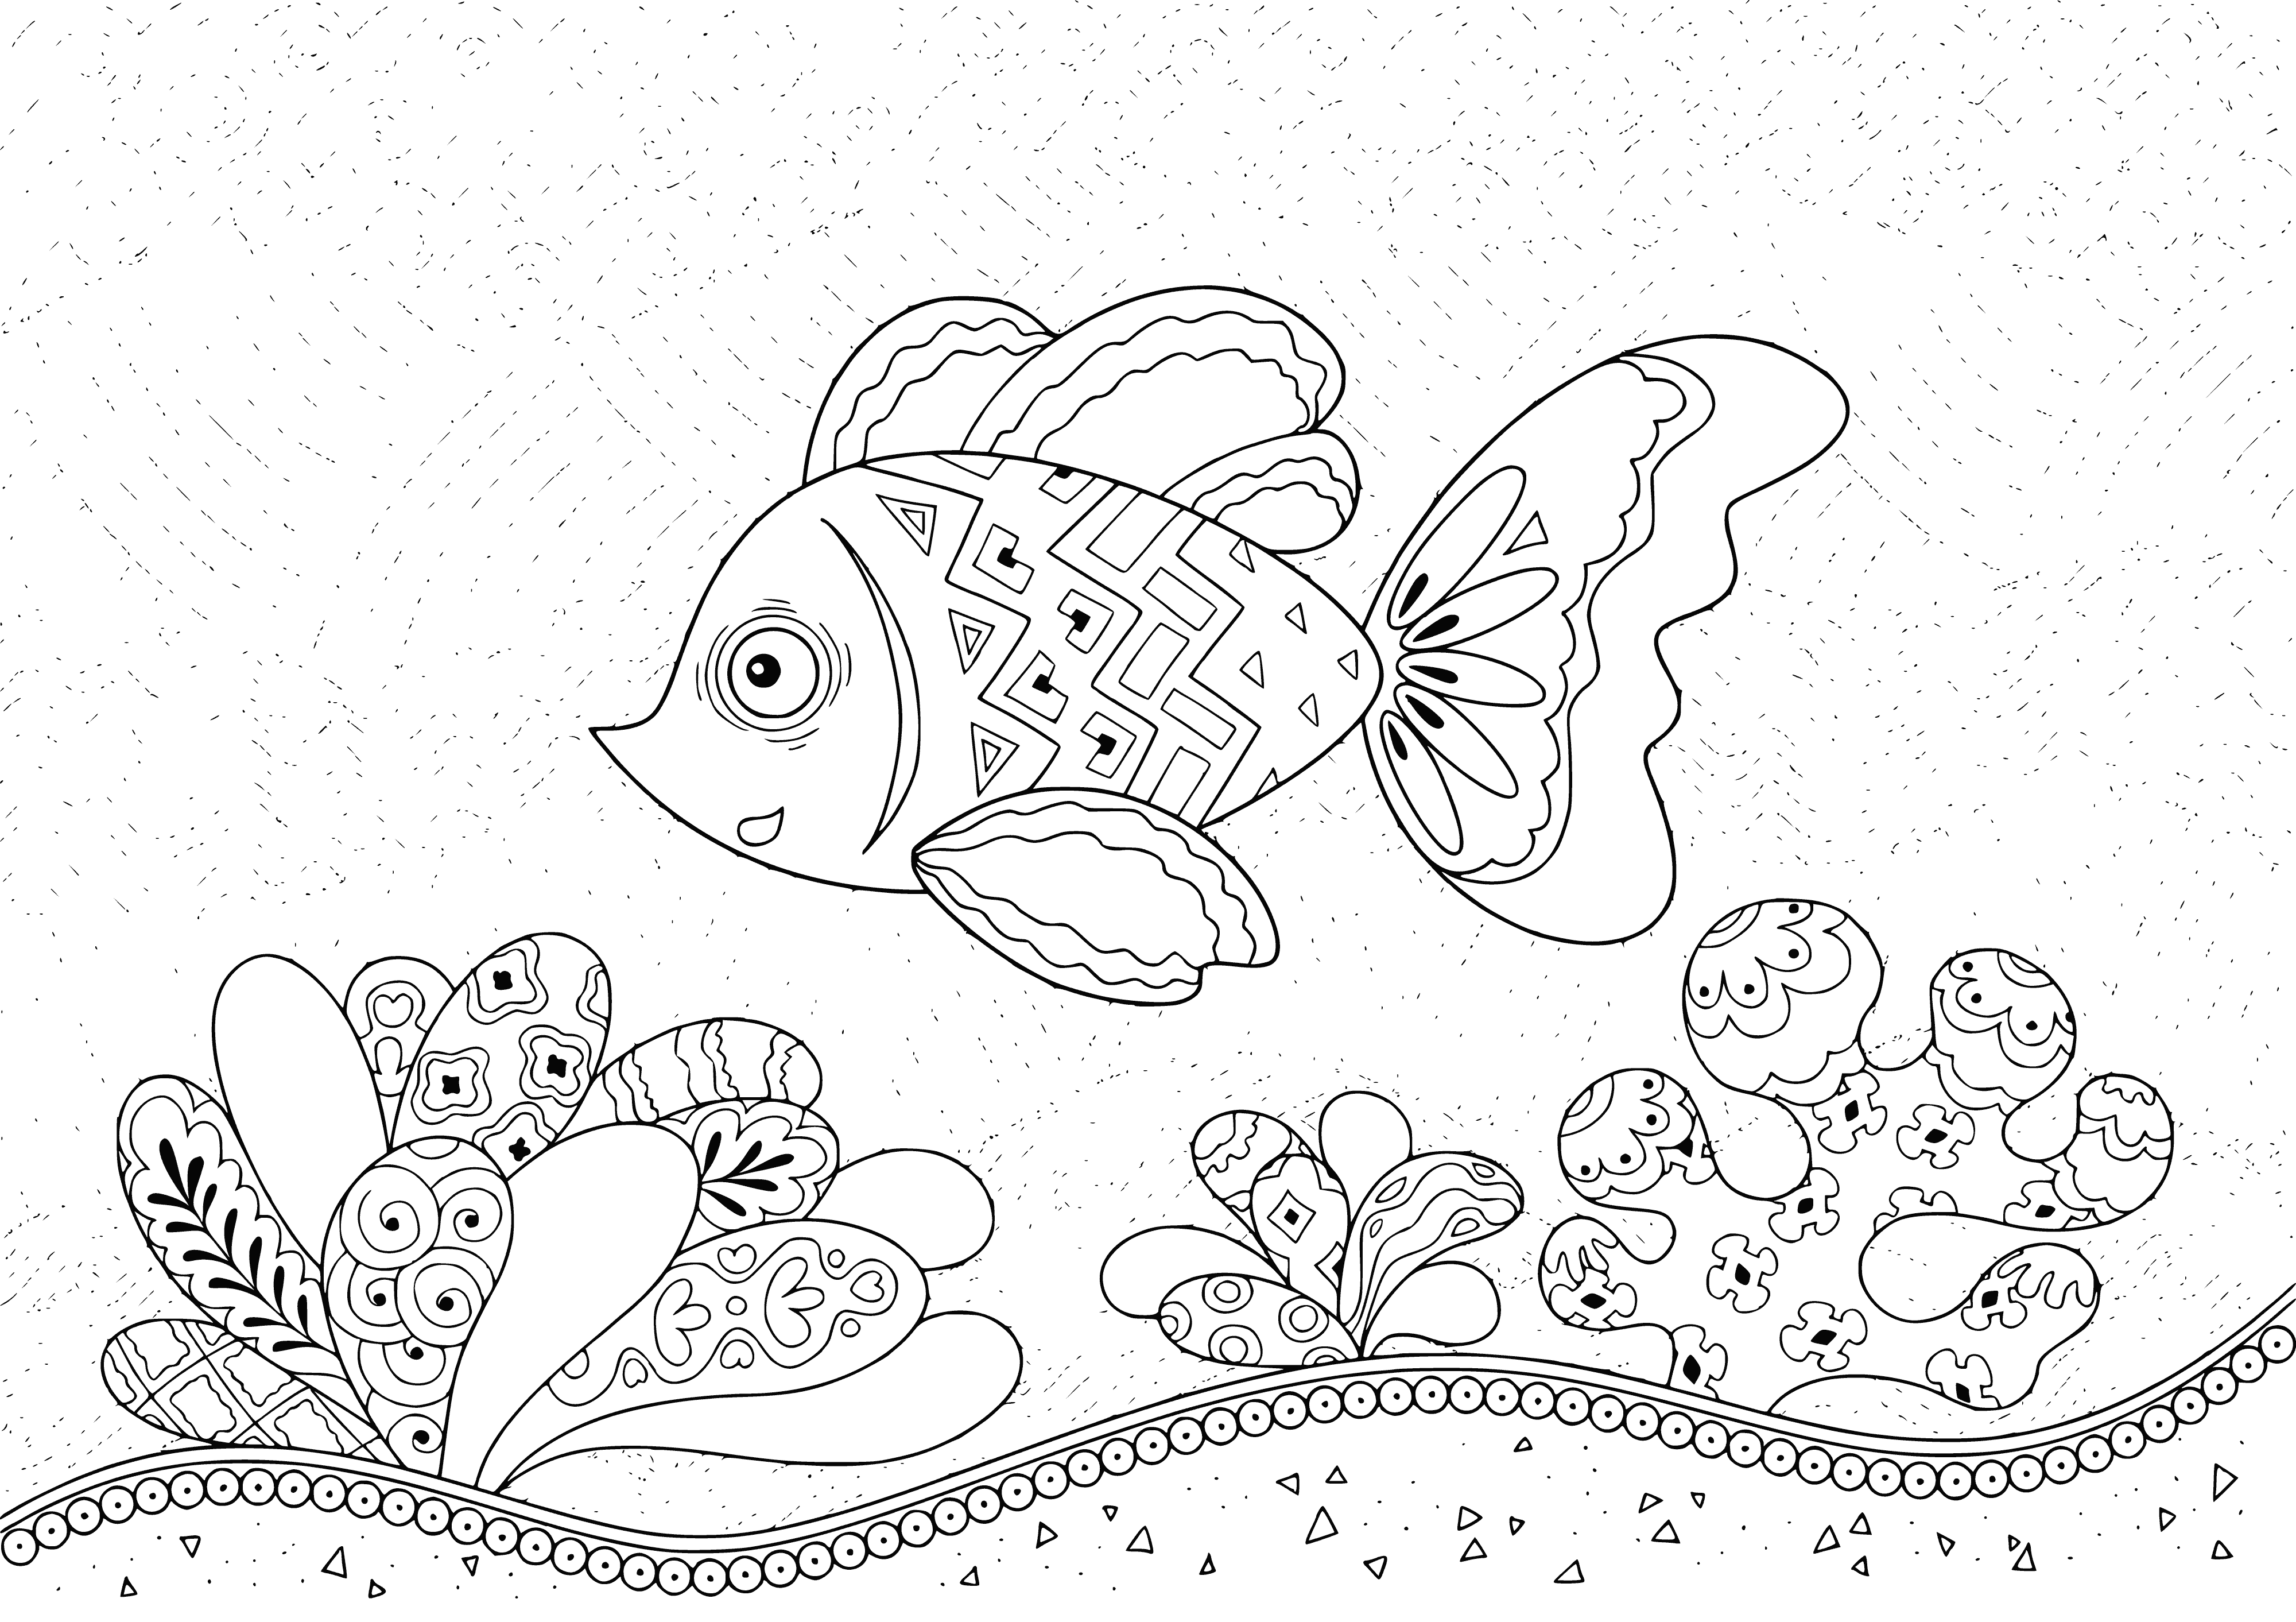 coloring page: Many fish of different sizes & colors - some near surface, others lower. Plus, a plant in the center of page. #oceanlife